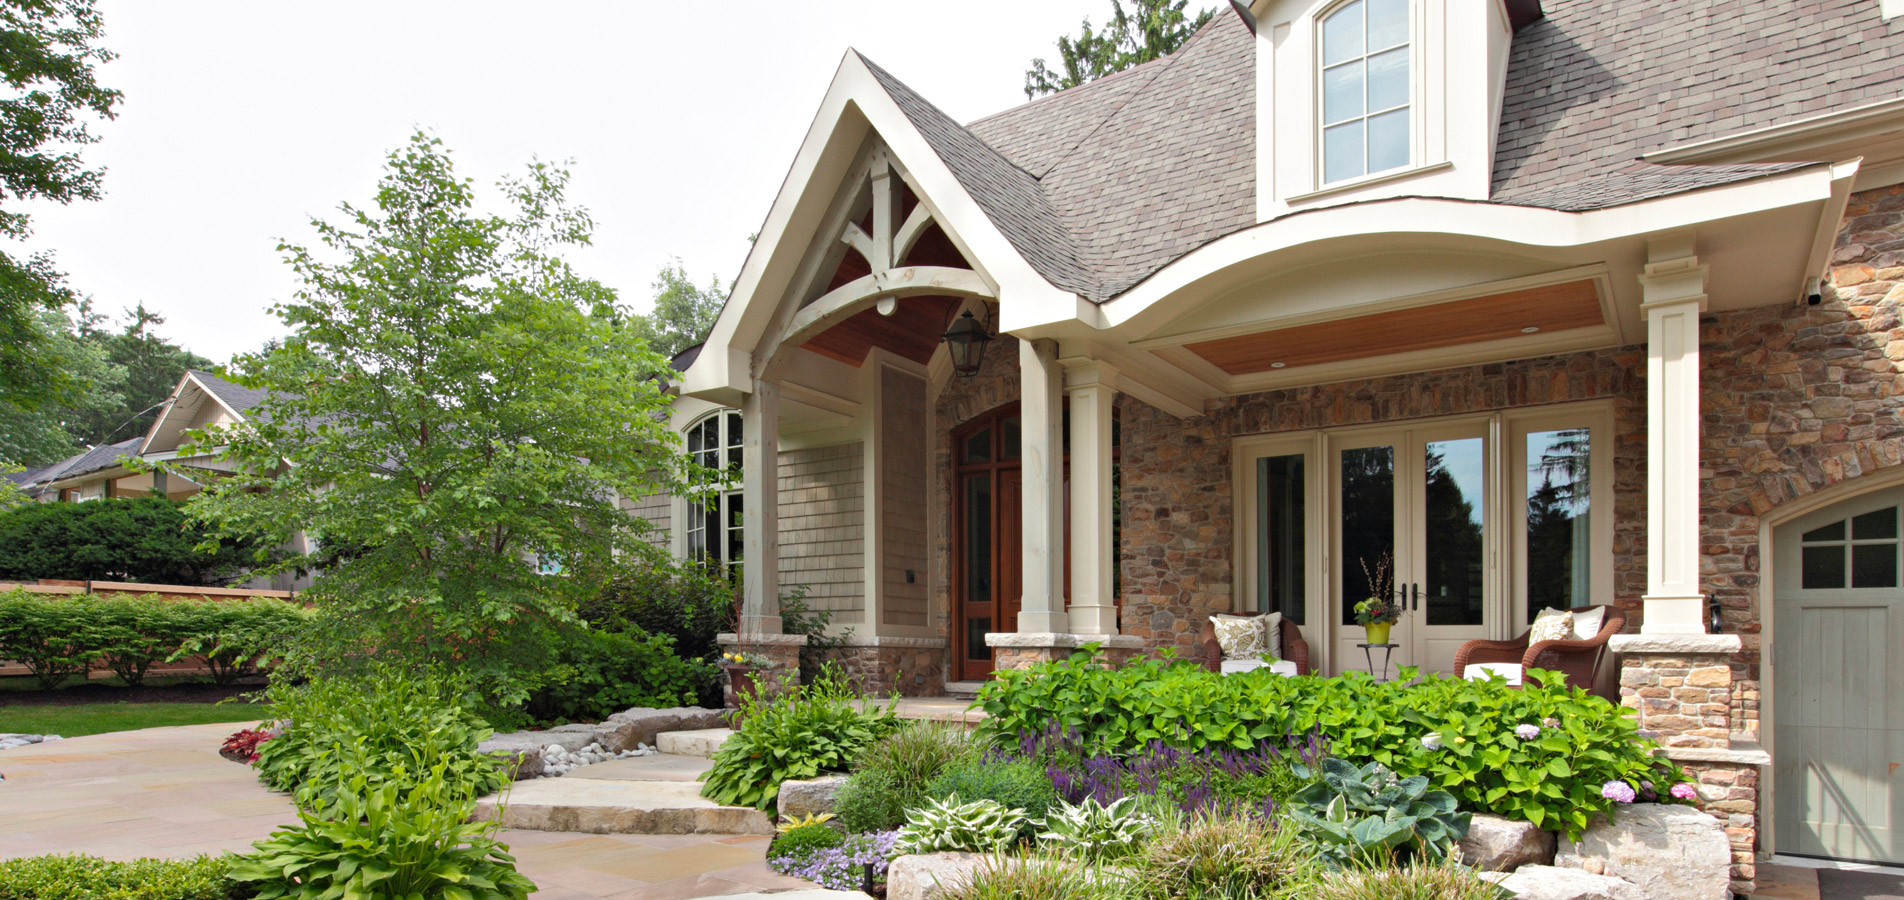 Mississauga home with natural stone, white doors and white columns.